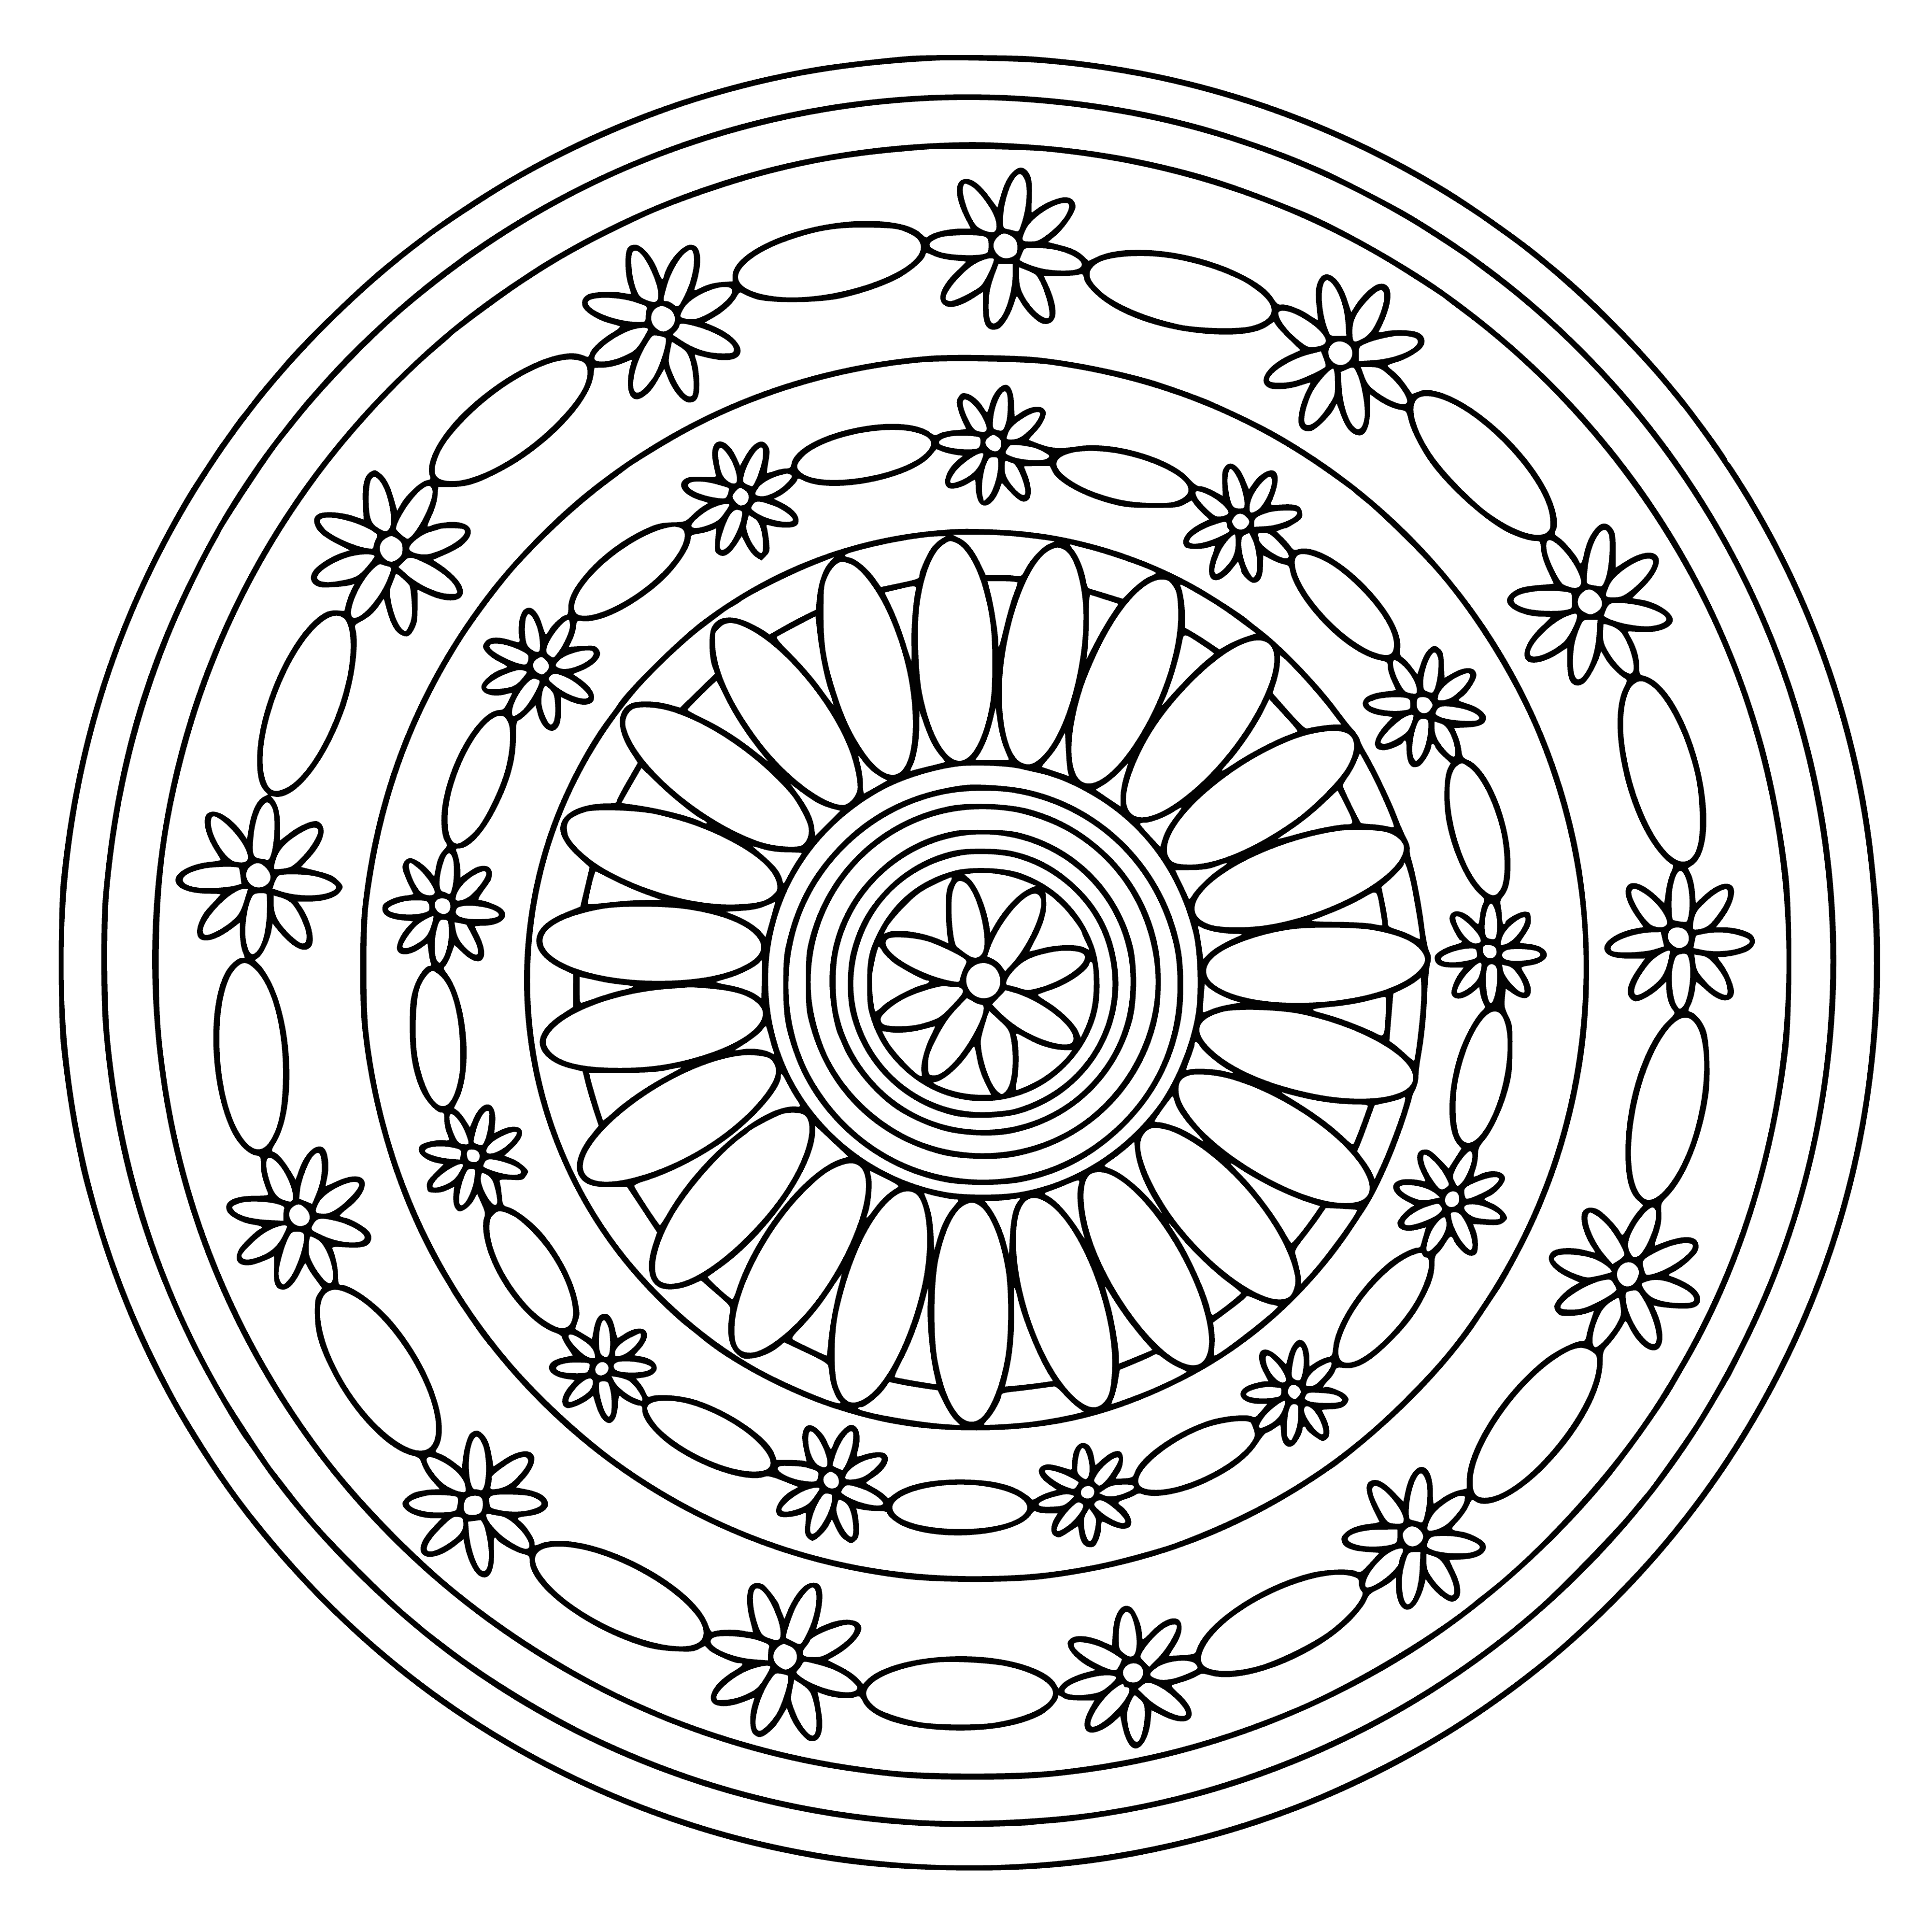 coloring page: A mandala is a symbol of the universe, with the sun, moon & earth at its center, surrounded by 4 cardinal points & a square, encircled by infinite nature.